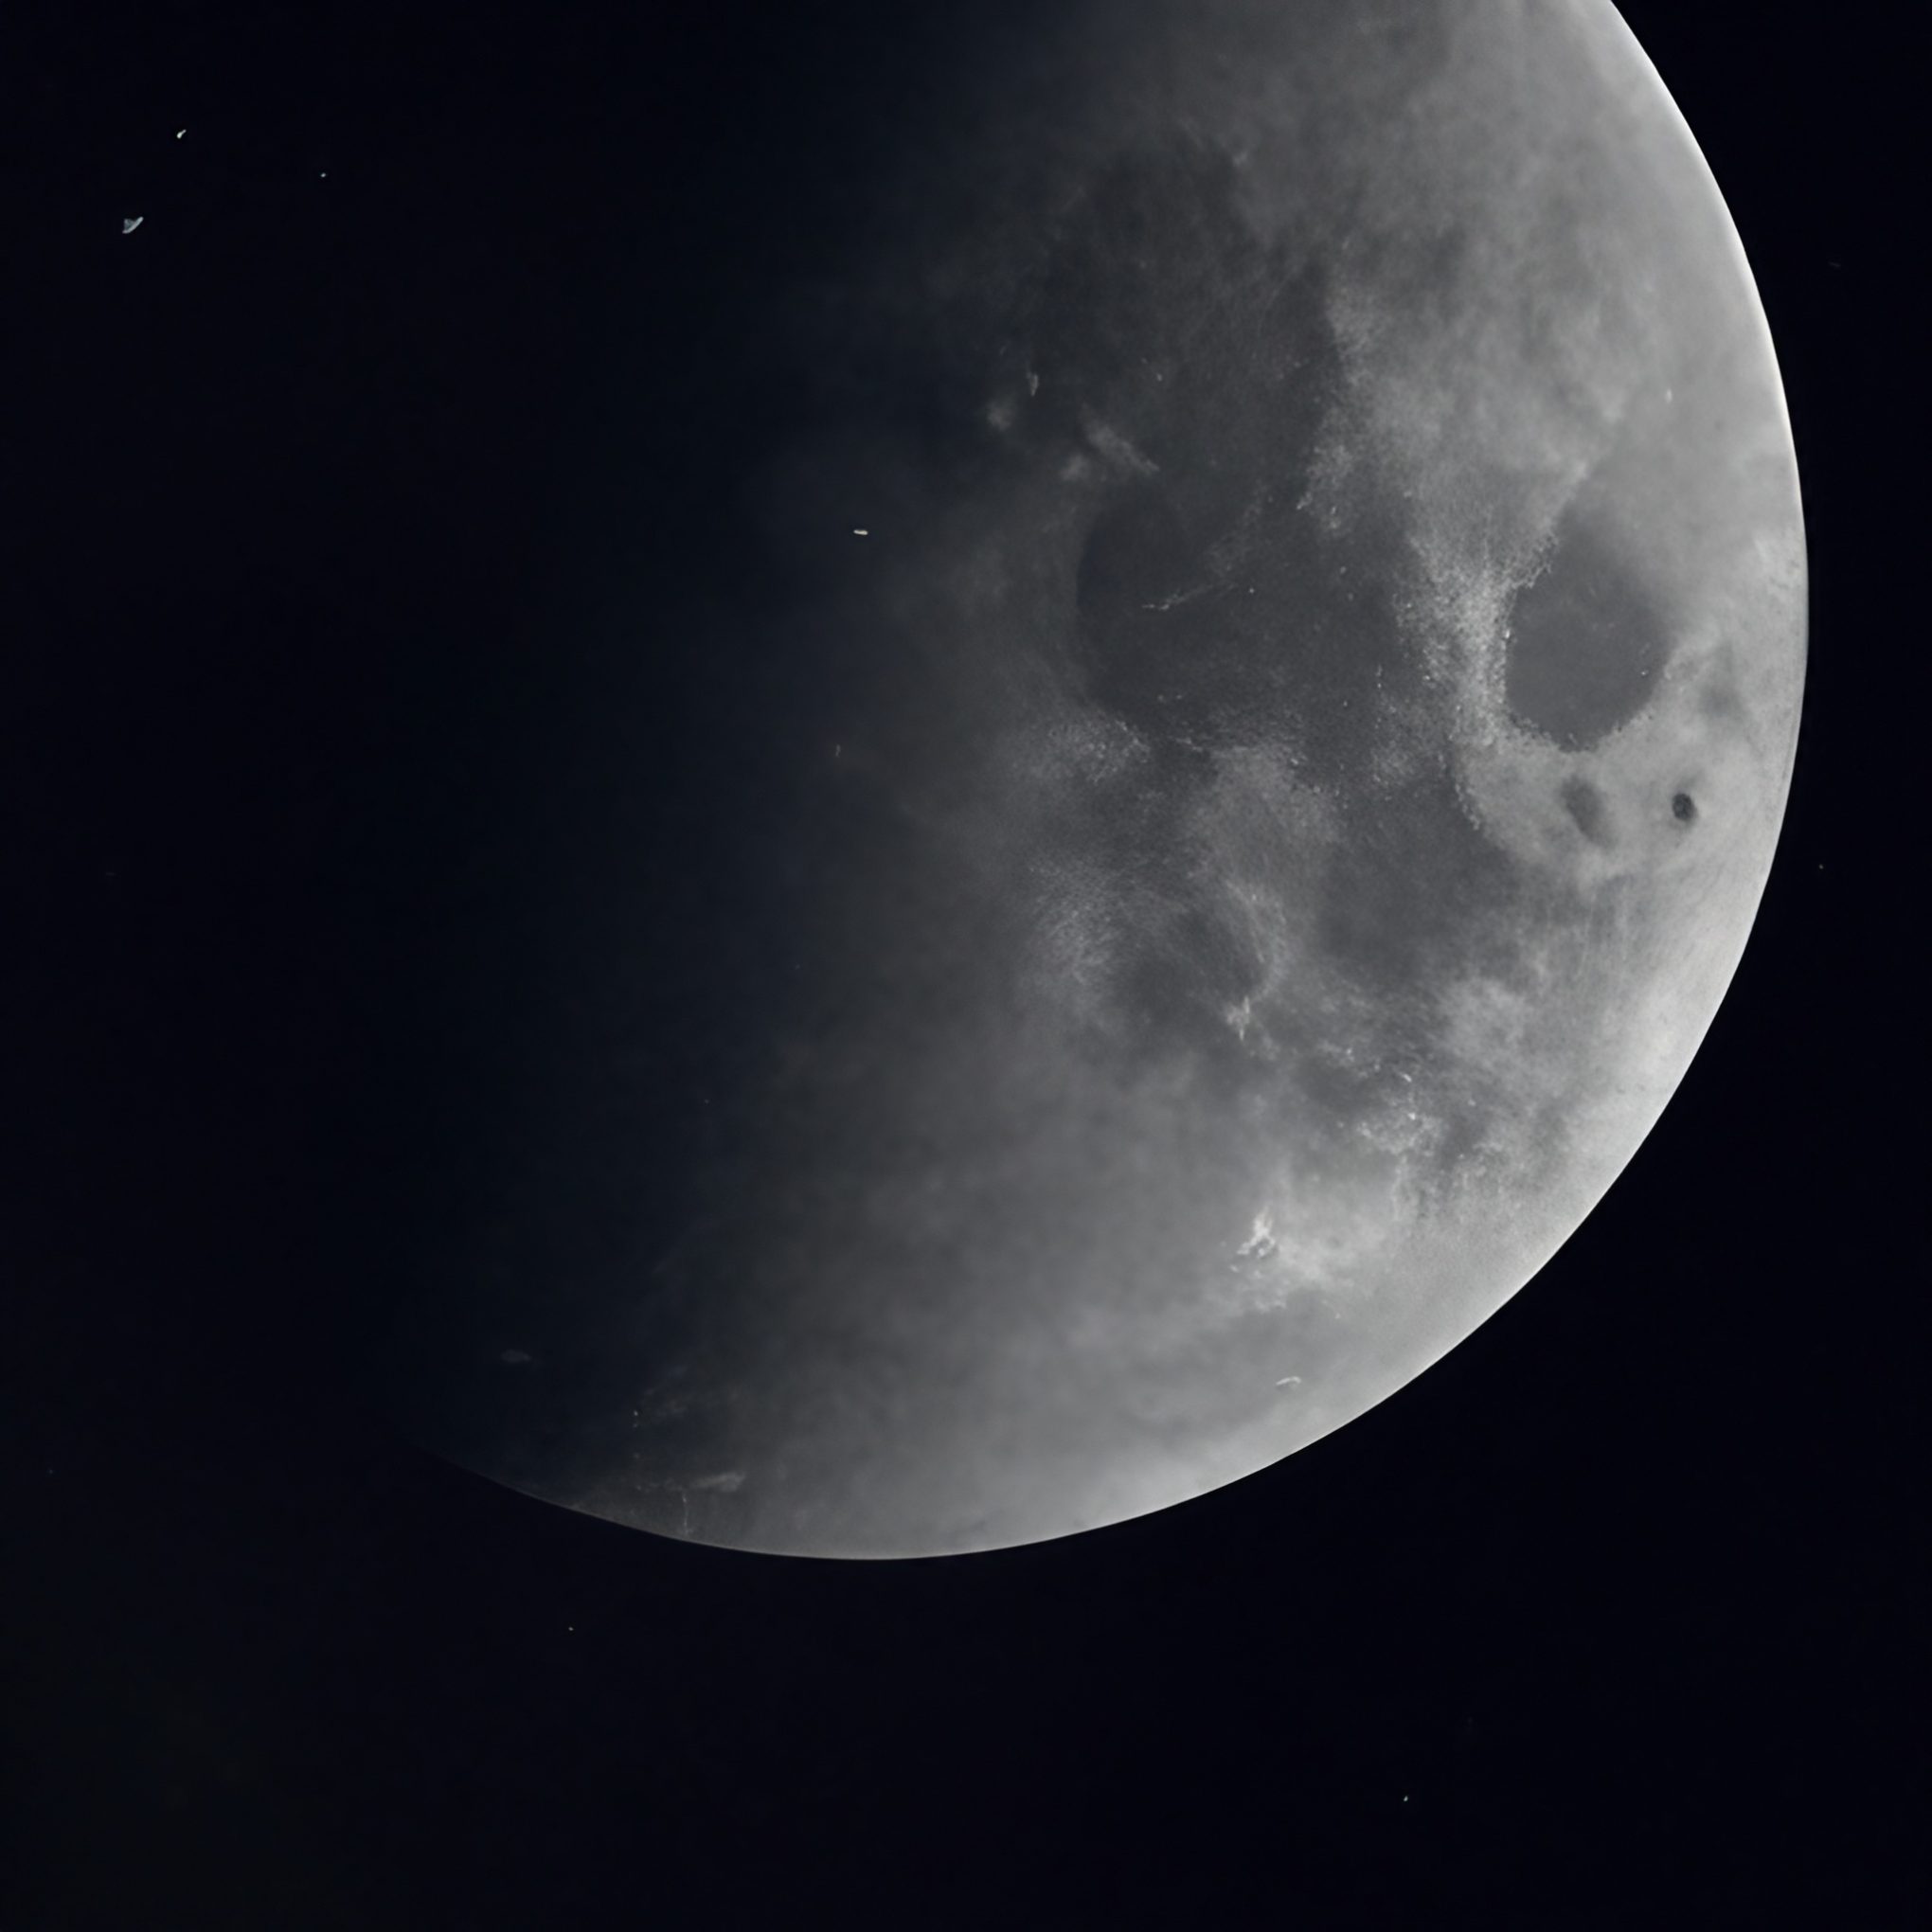 The moon free stock image